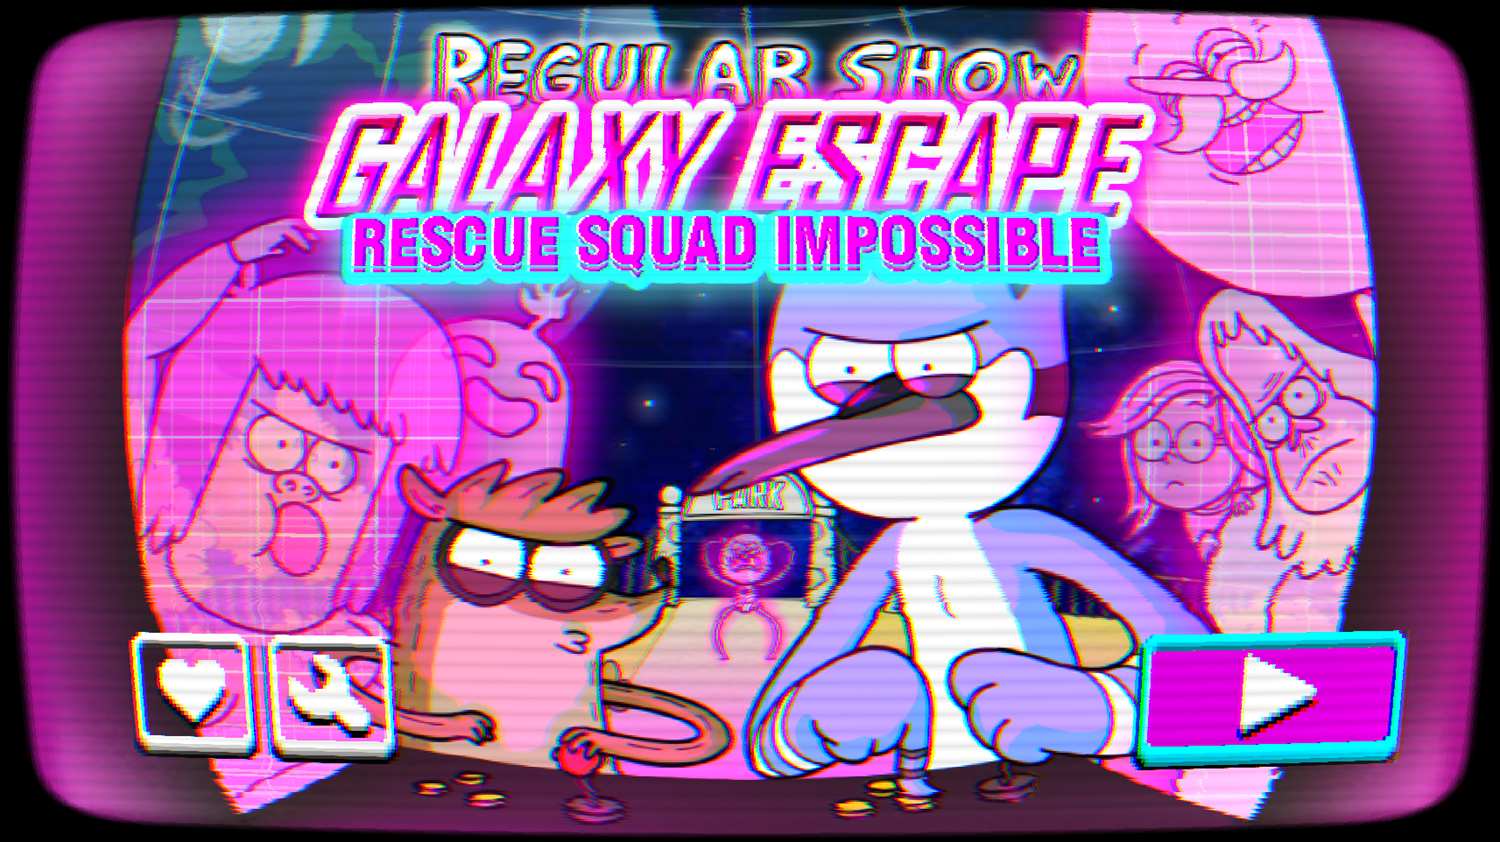 Regular Show Galaxy Escape Rescue Squad Impossible Game Welcome Screen Screenshot.